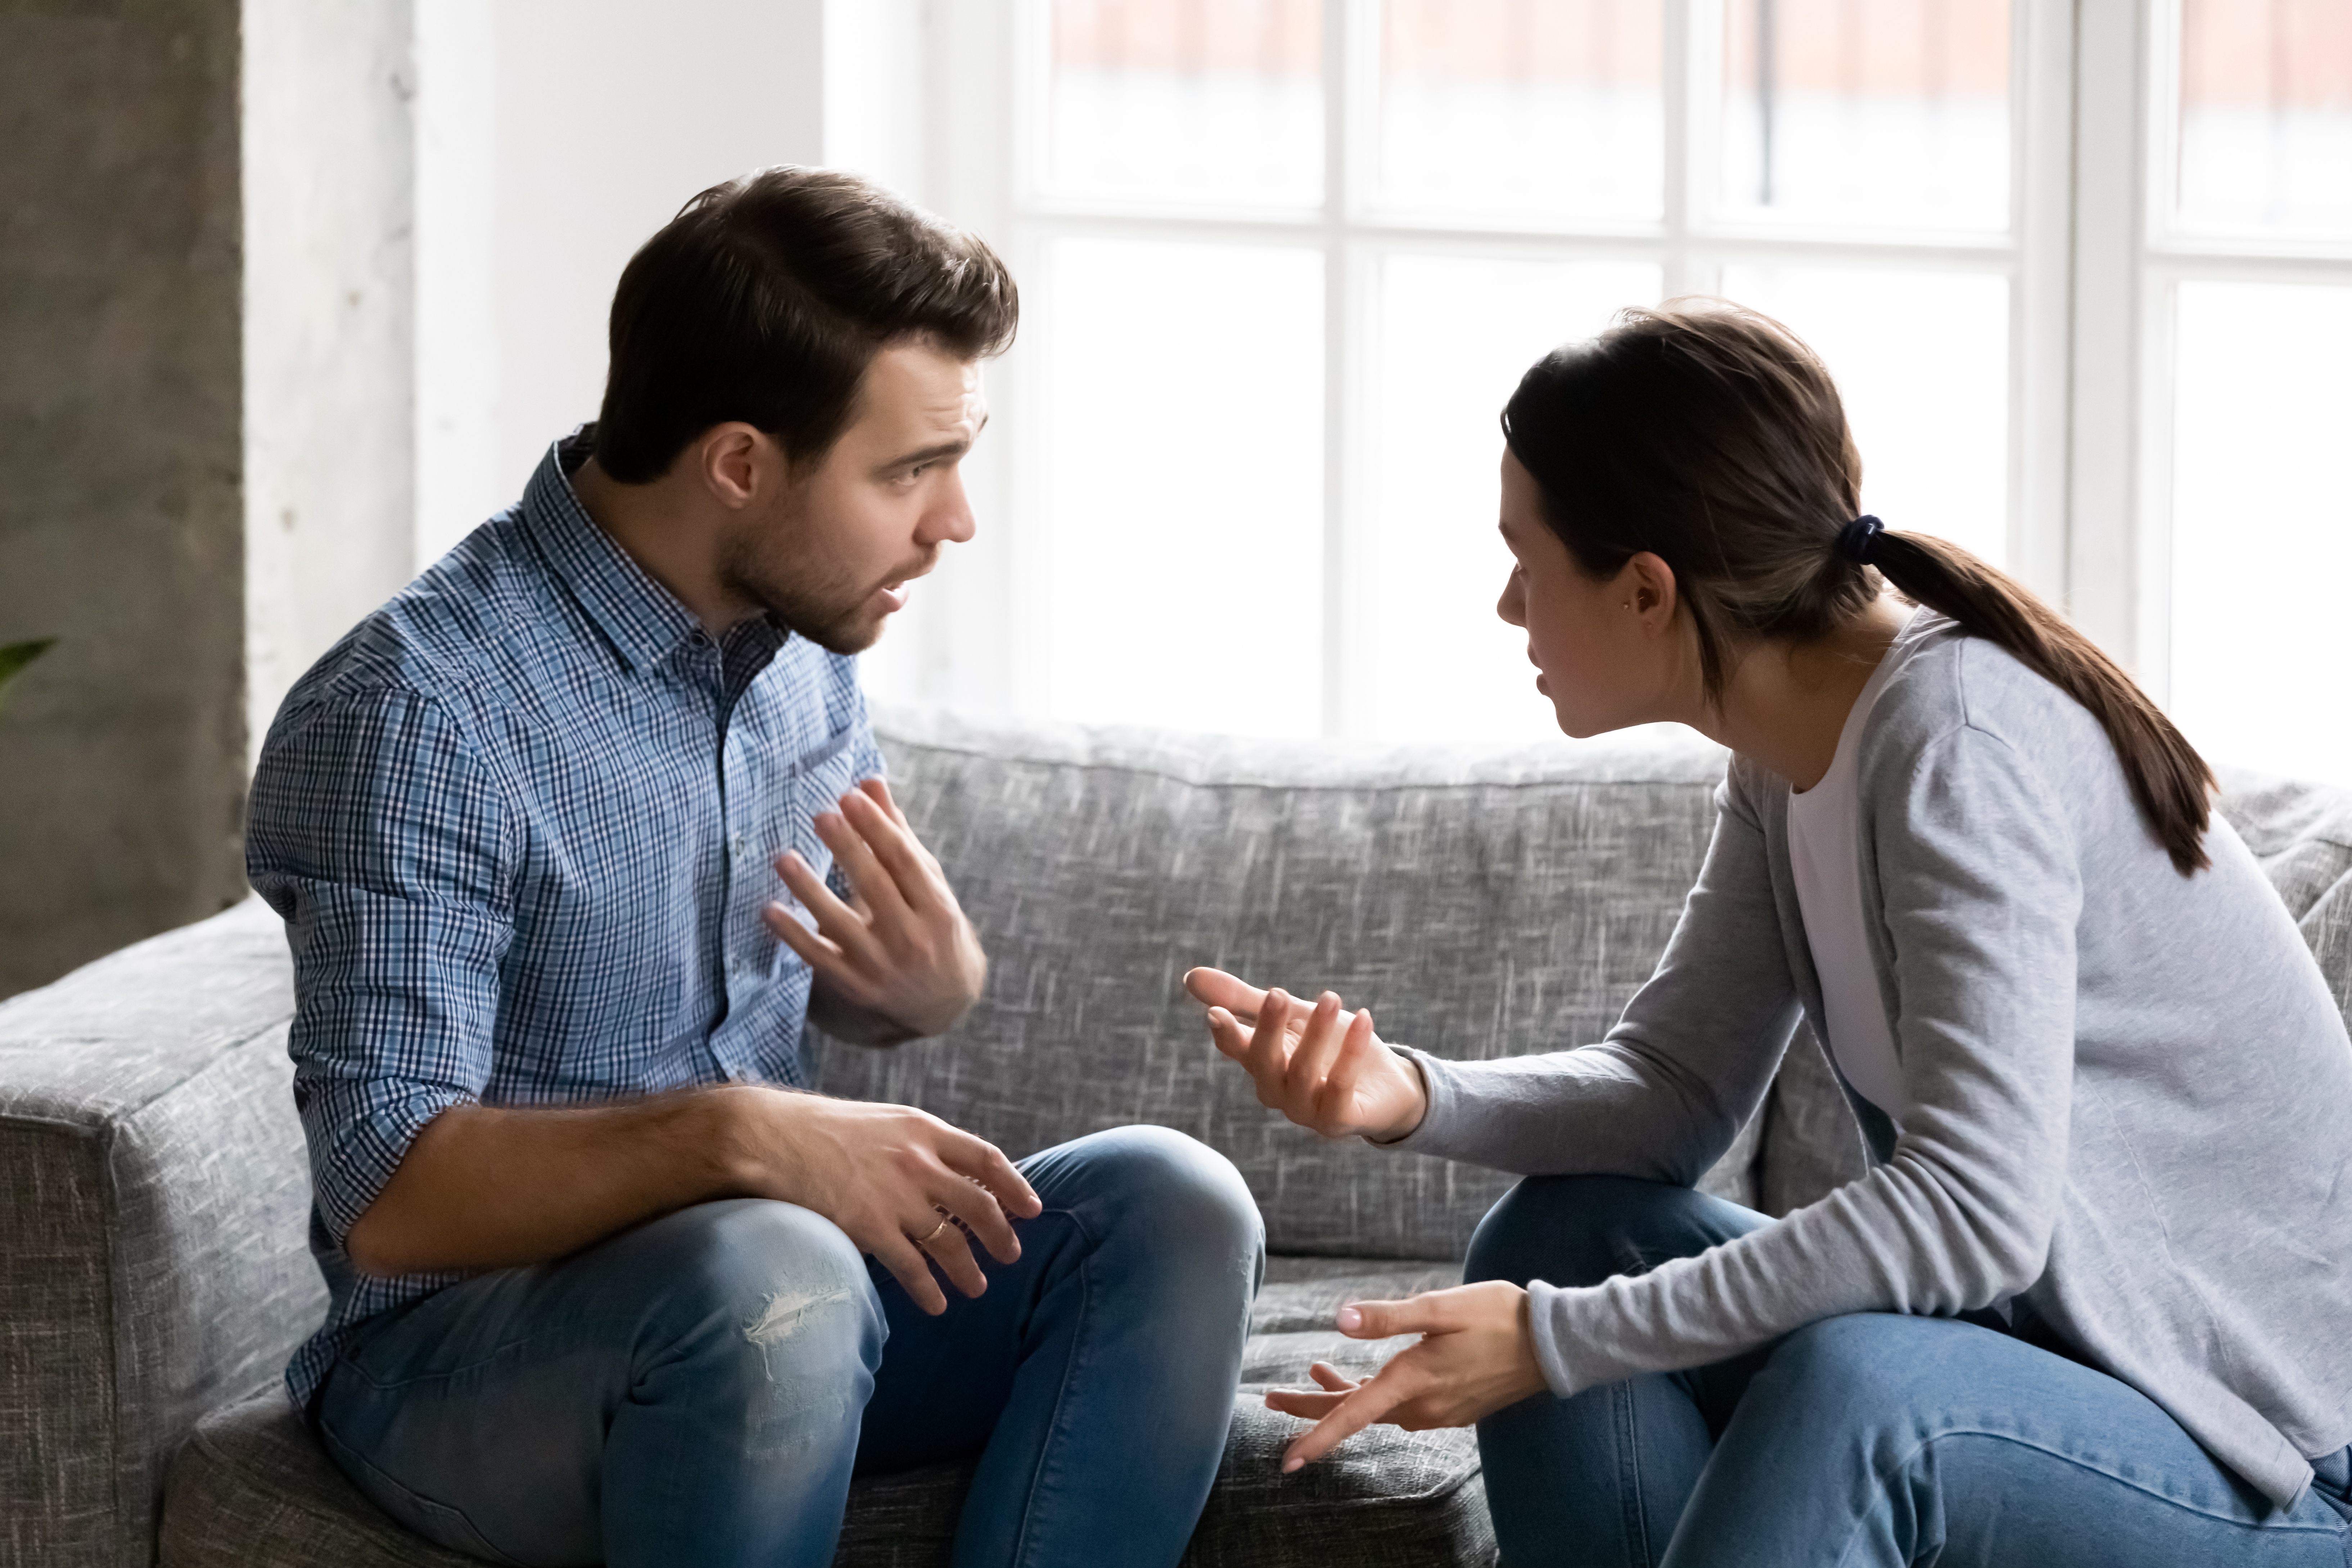 A married couple arguing while sitting on the sofa | Source: Shutterstock